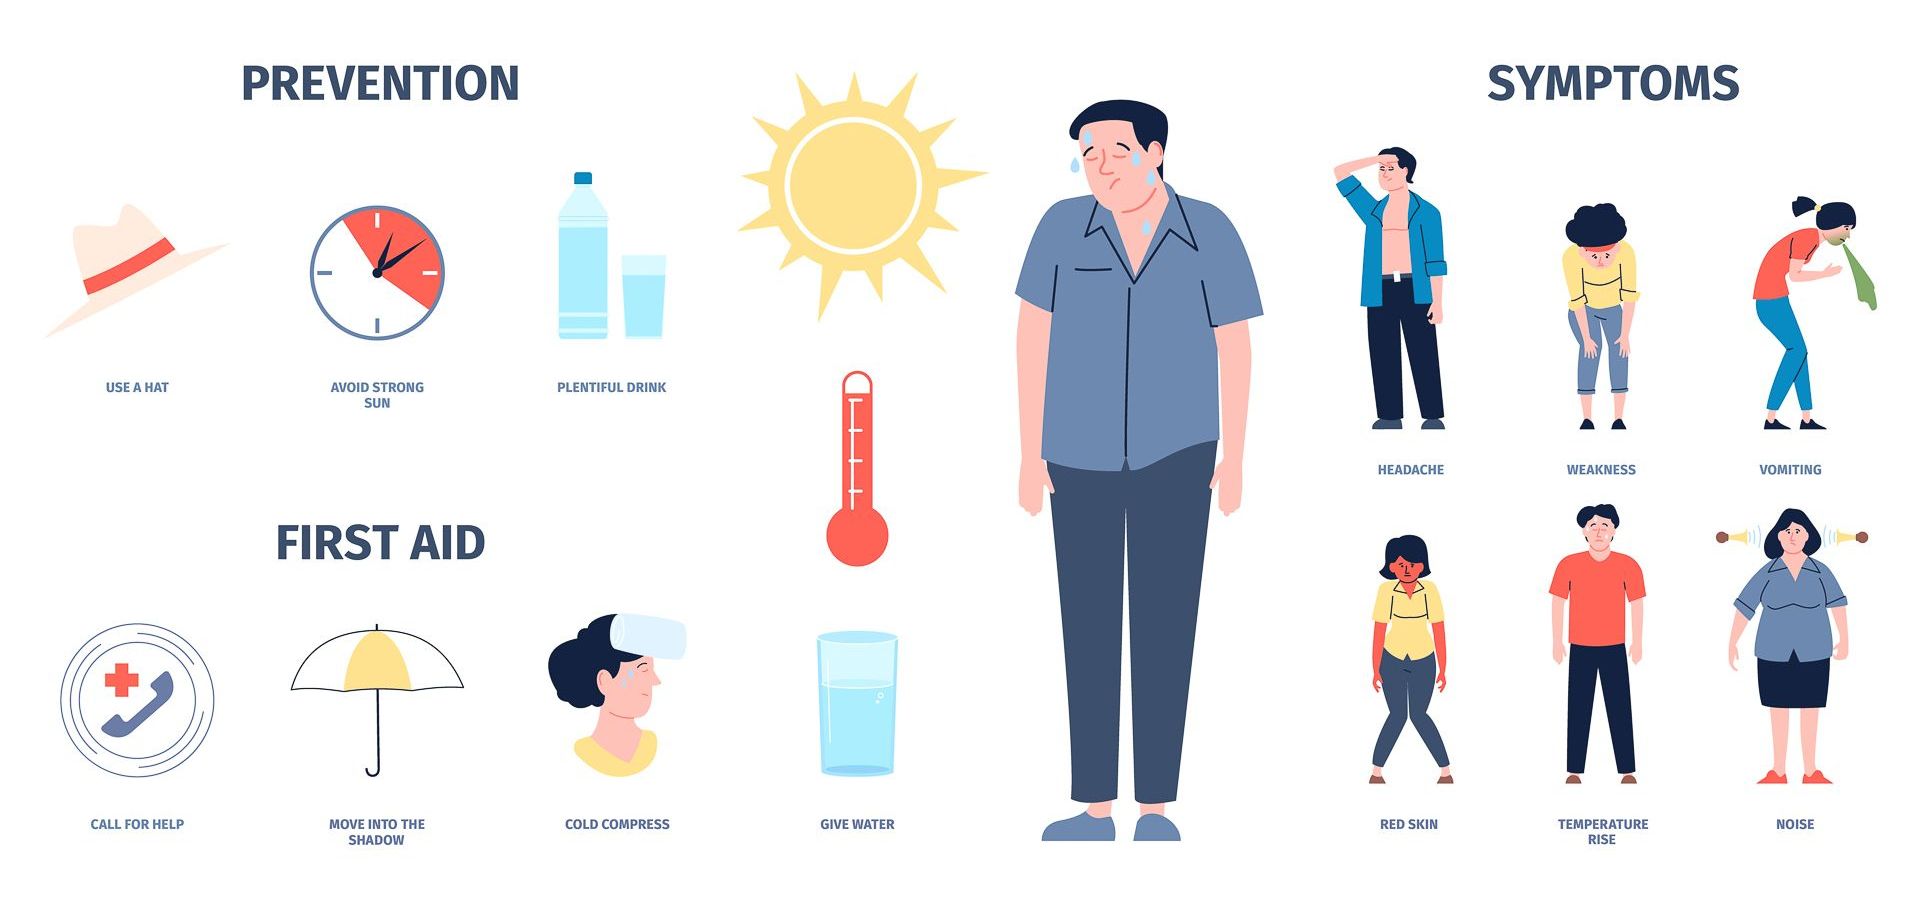 Heat Stroke Prevention, Symptoms and First Aid